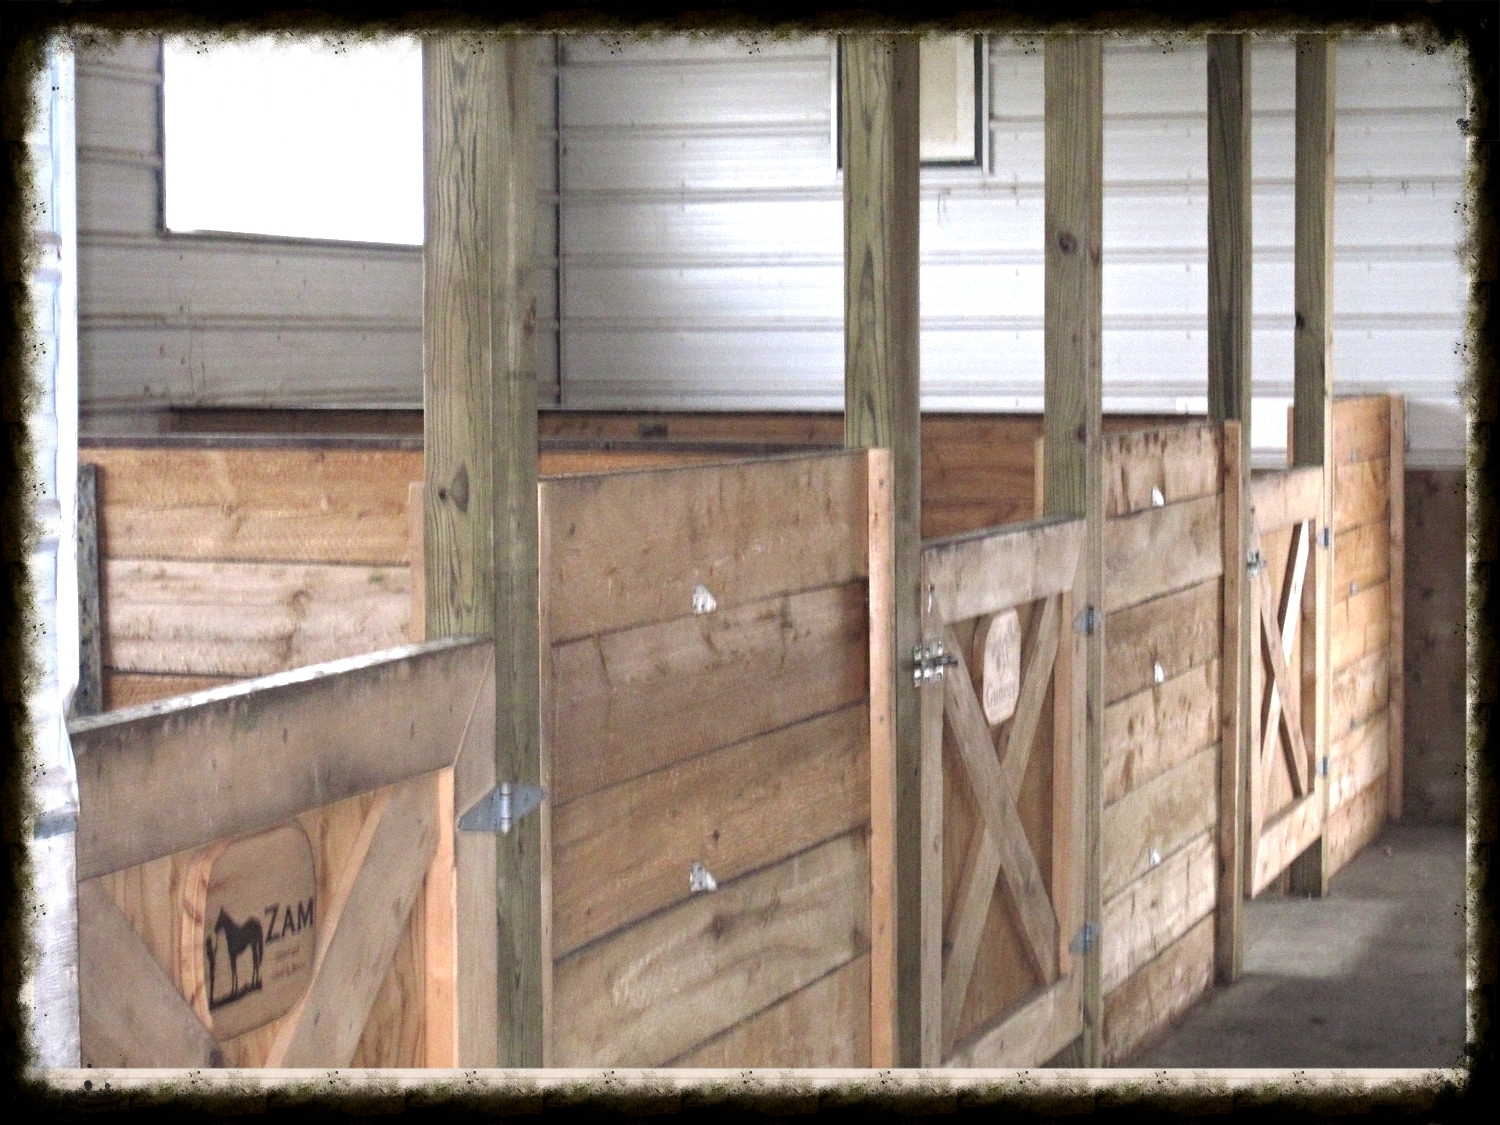  Three stall barn fitted with horse matting and a heated tack room. 